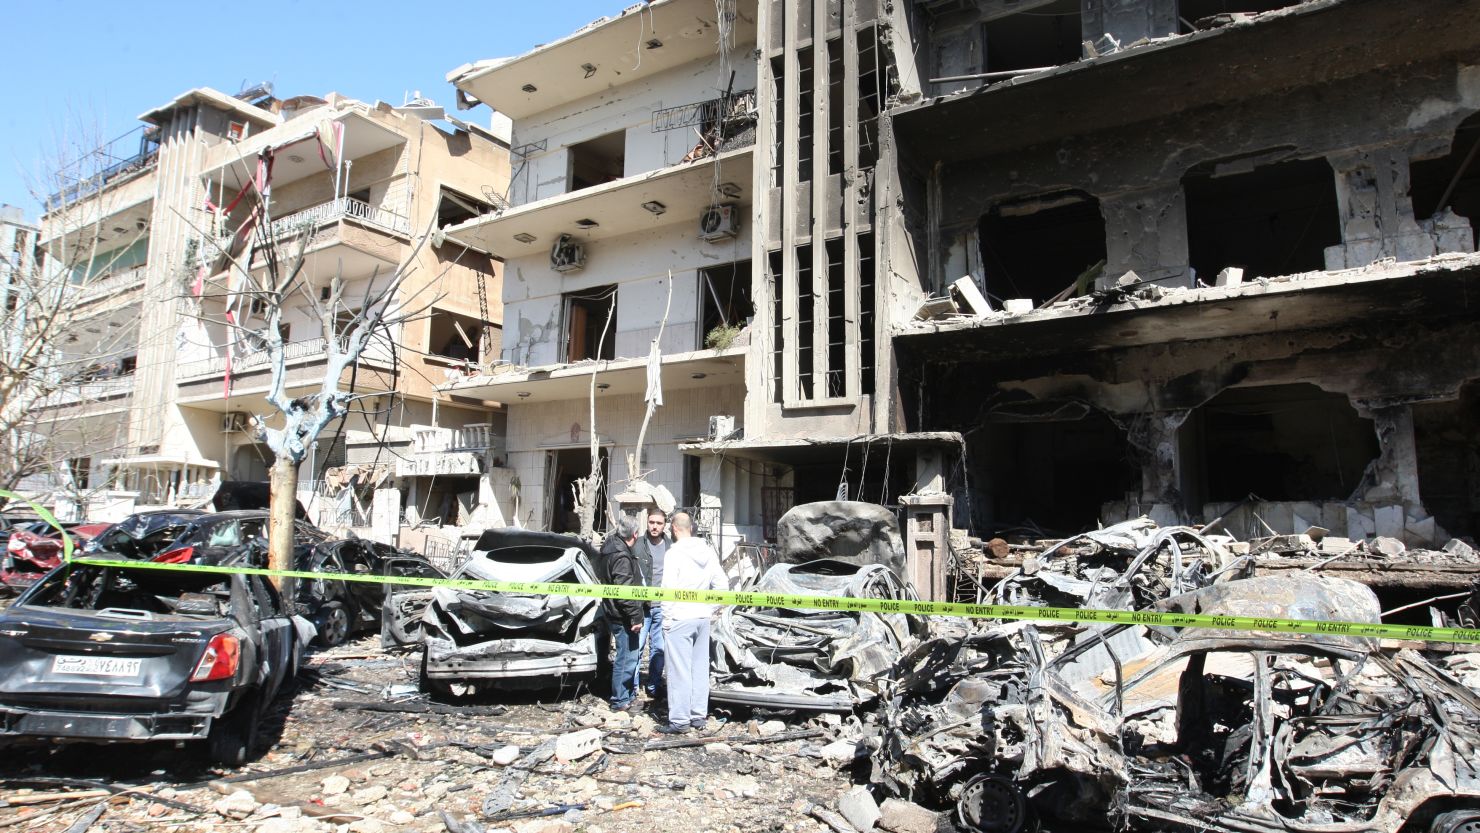 Syrian security officers inspect the scene at a destroyed building following twin bomb attacks in Damascus on Saturday.